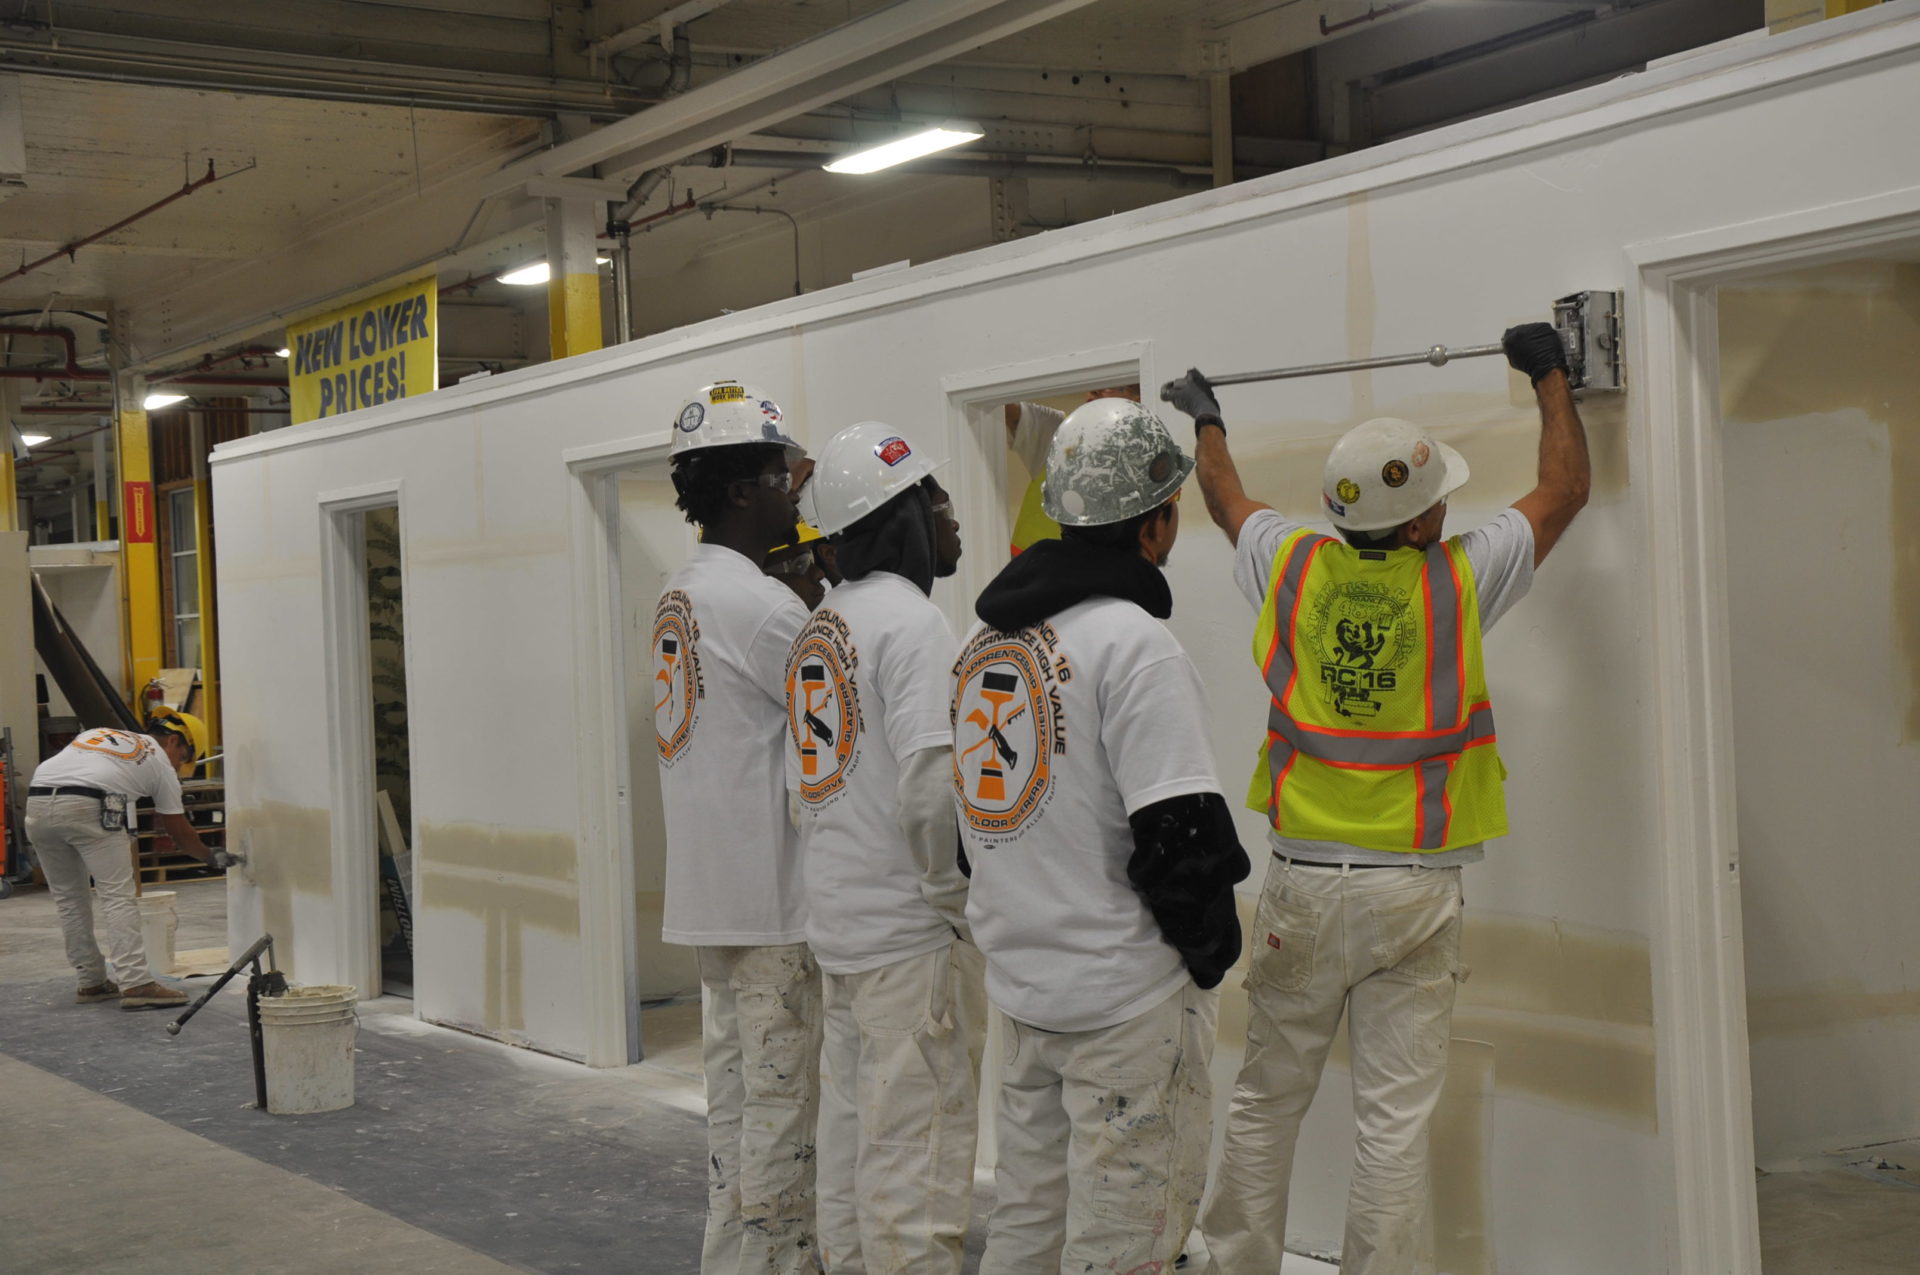 Image from the Gallery: National Apprenticeship Week Safety Day – San Leandro, CA